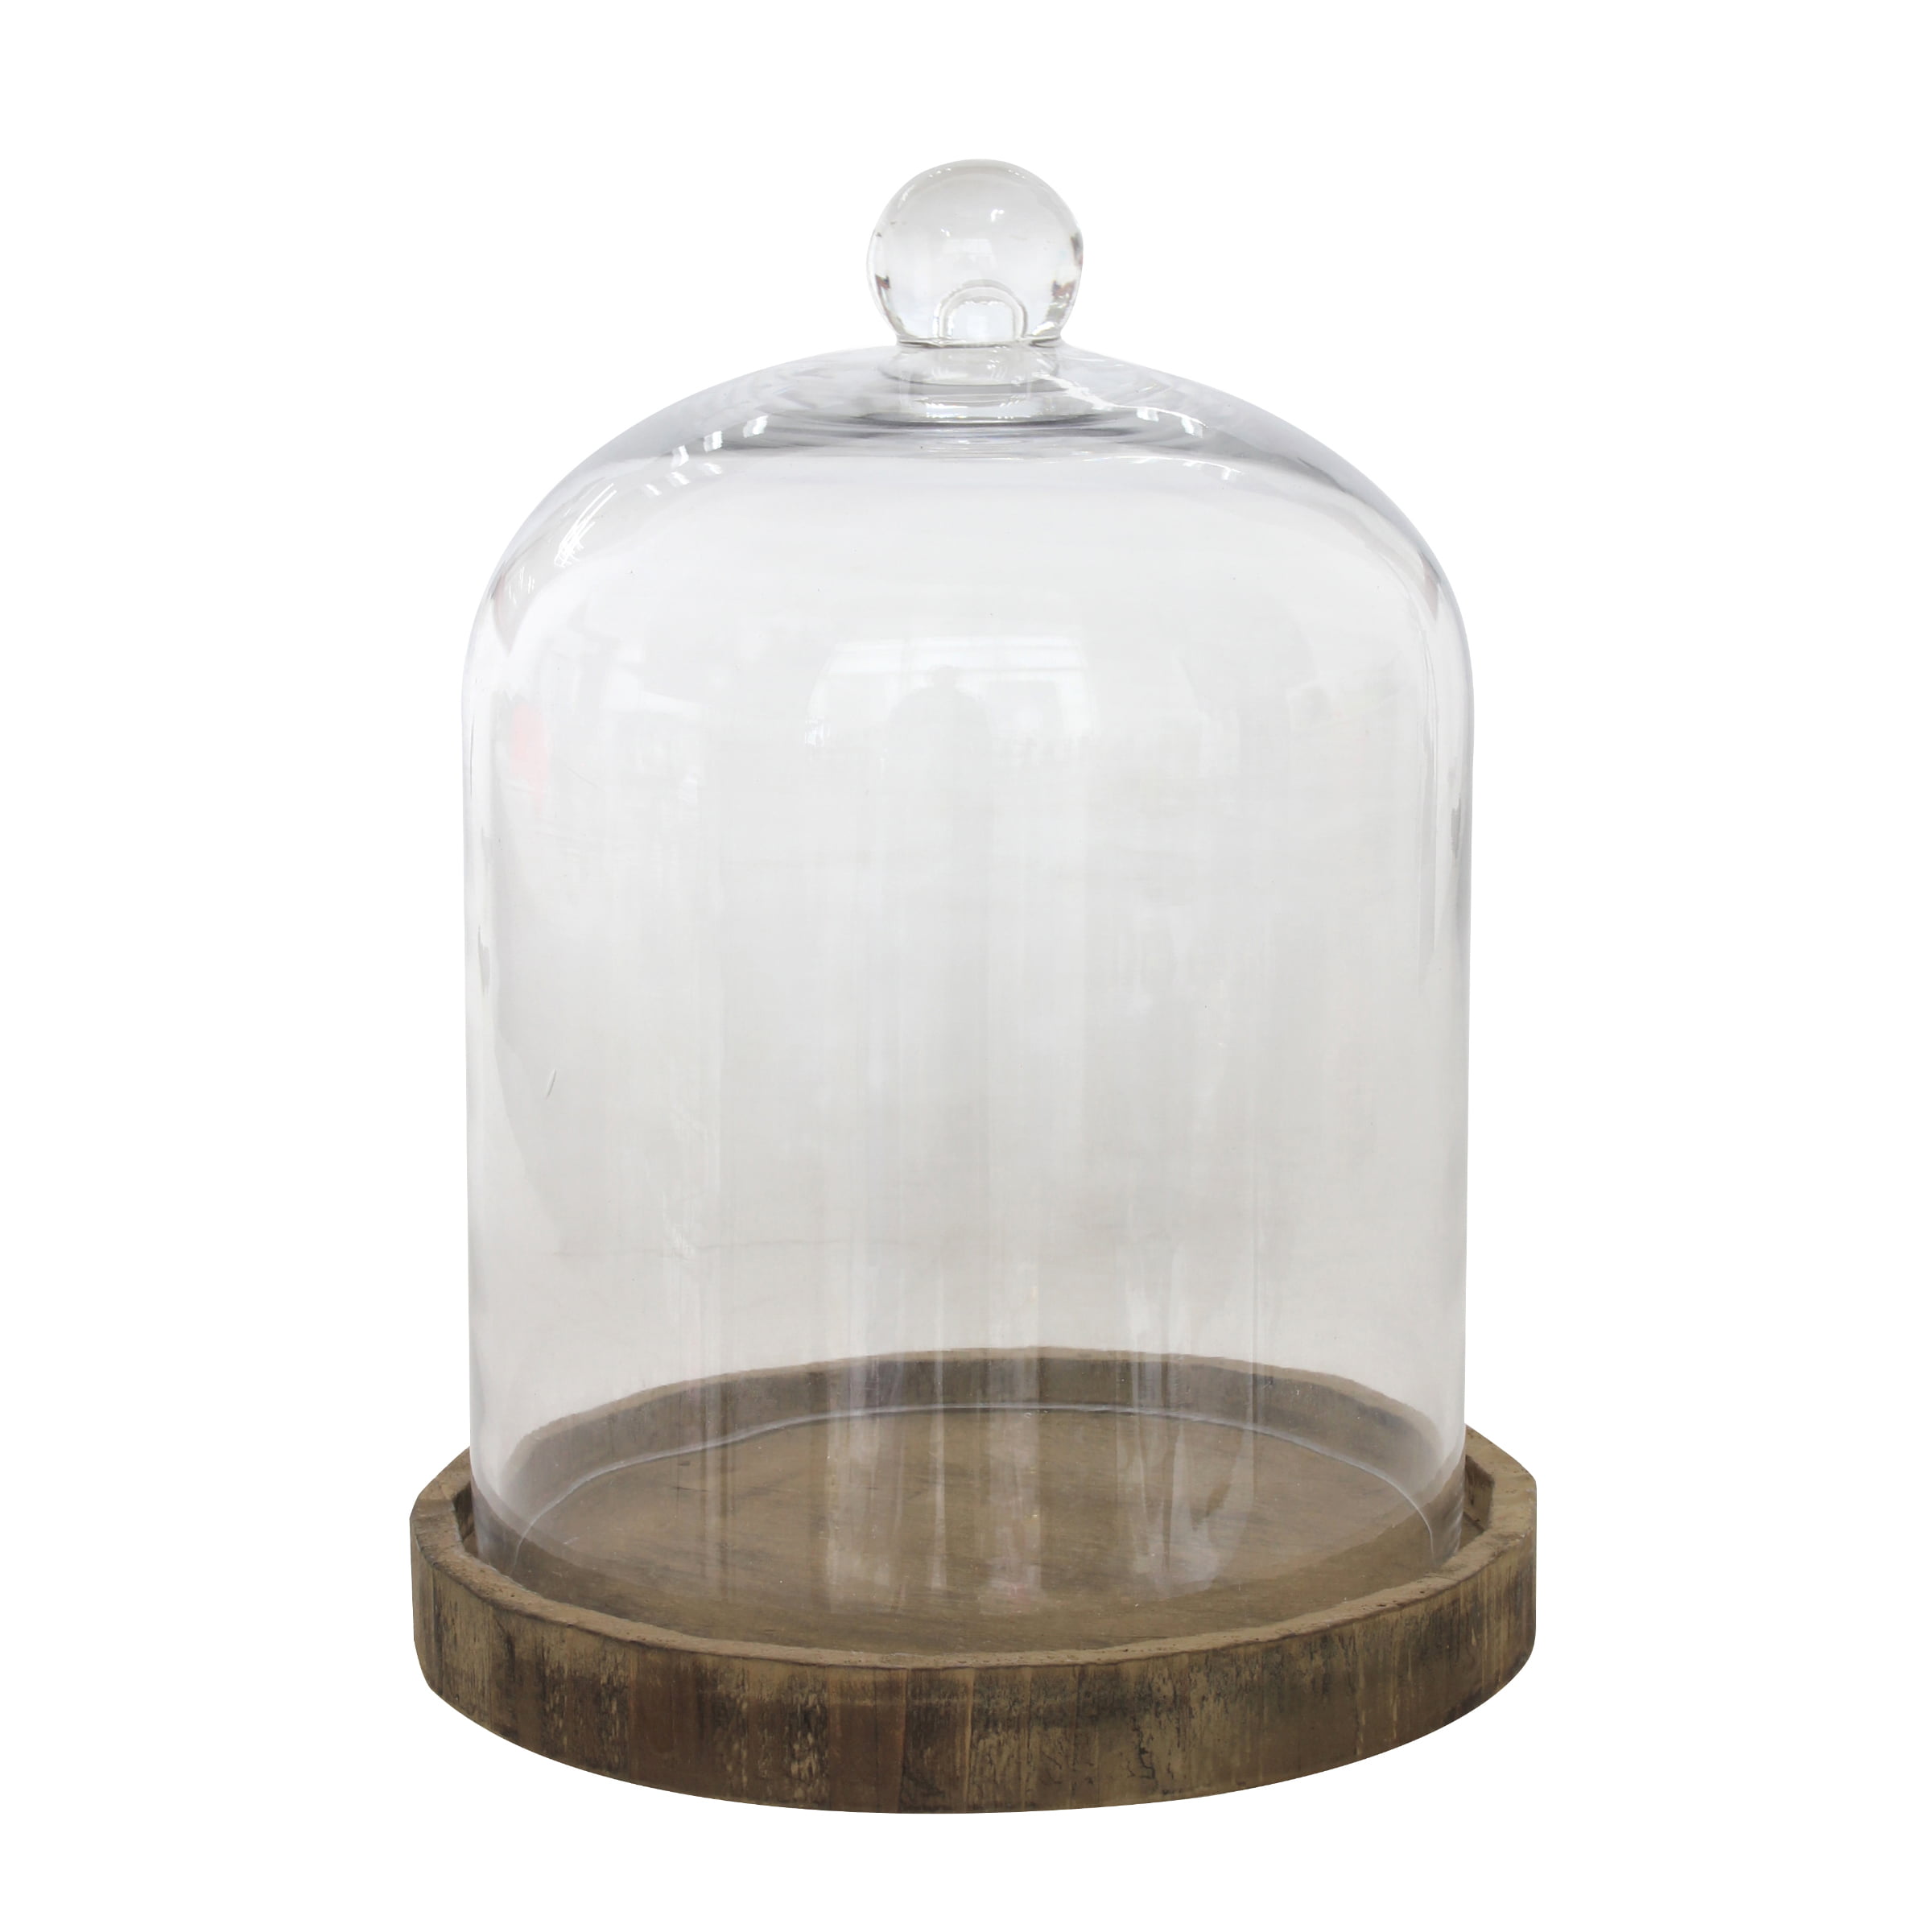 Stonebriar 8 Inch Clear Glass Dome Cloche with Rustic Wooden Base